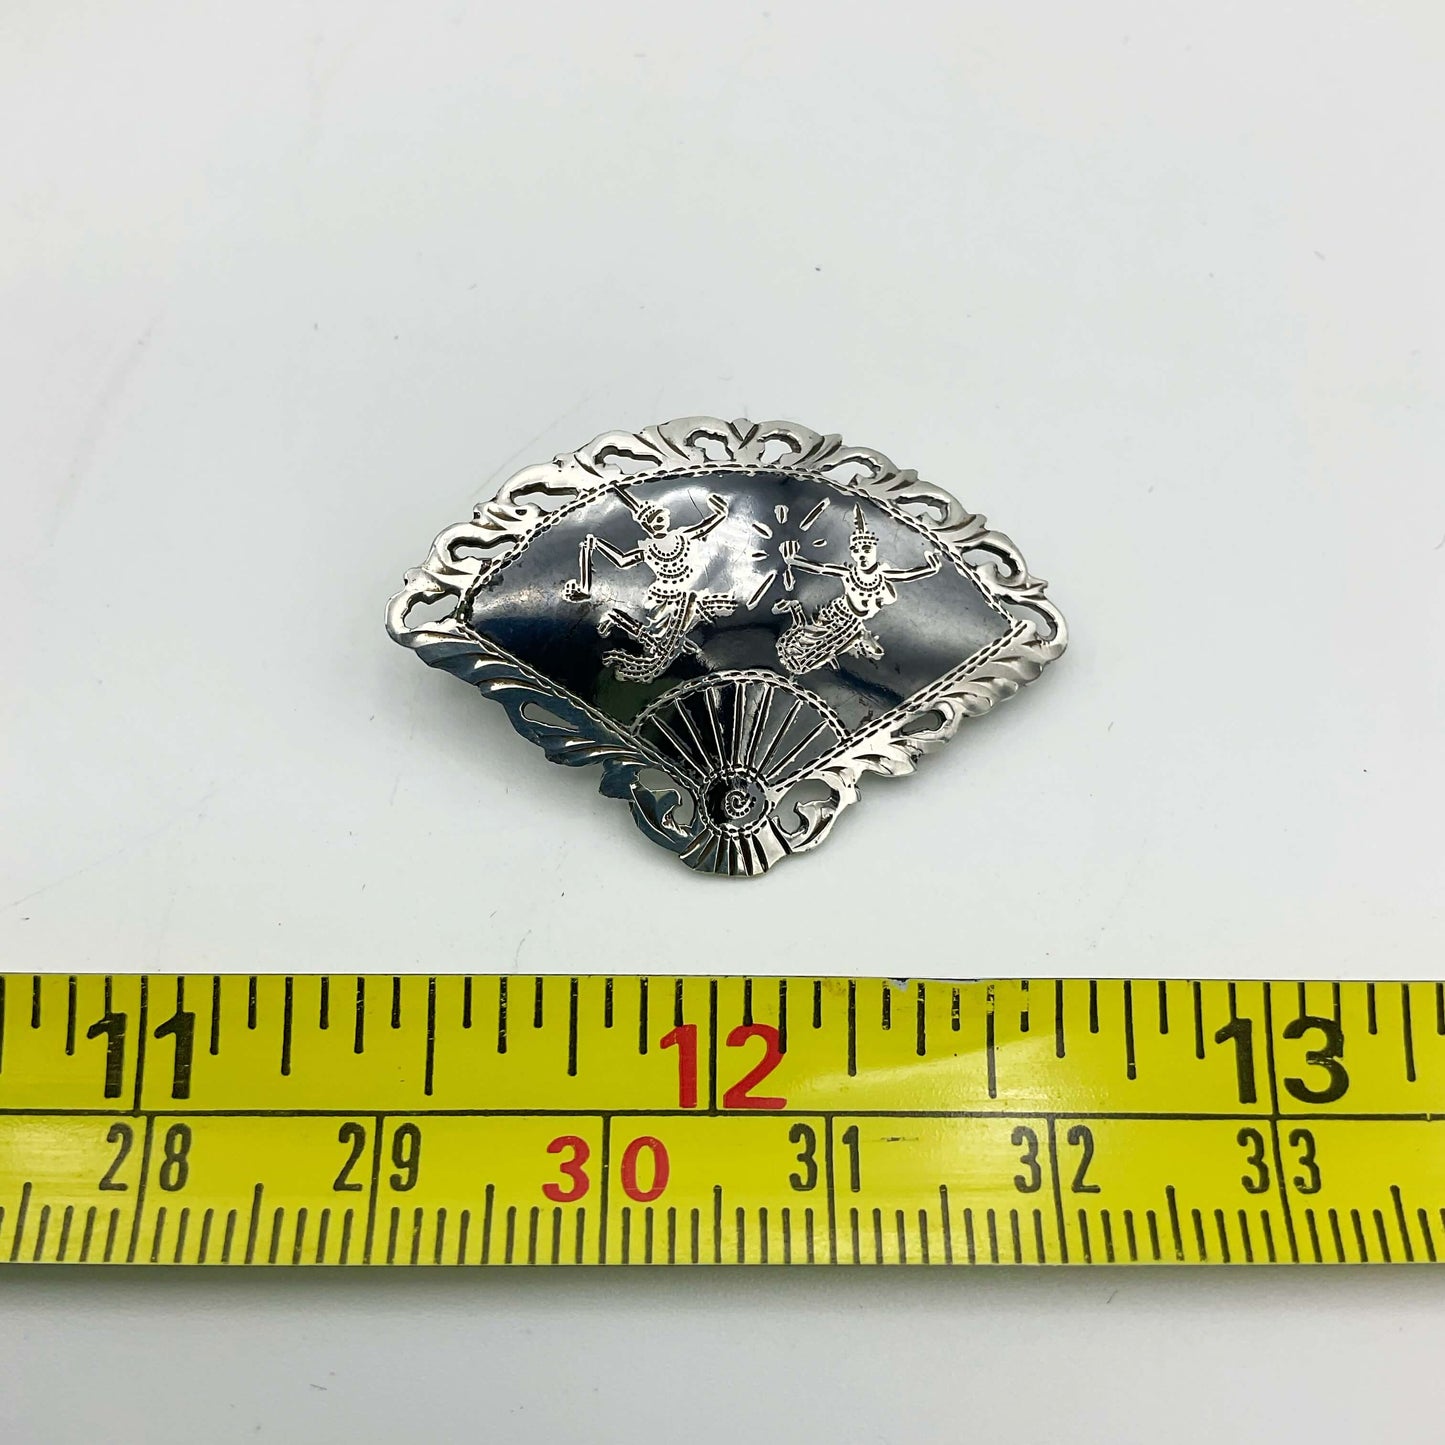 Beautiful Silver Niello Brooch next to a tape measure.